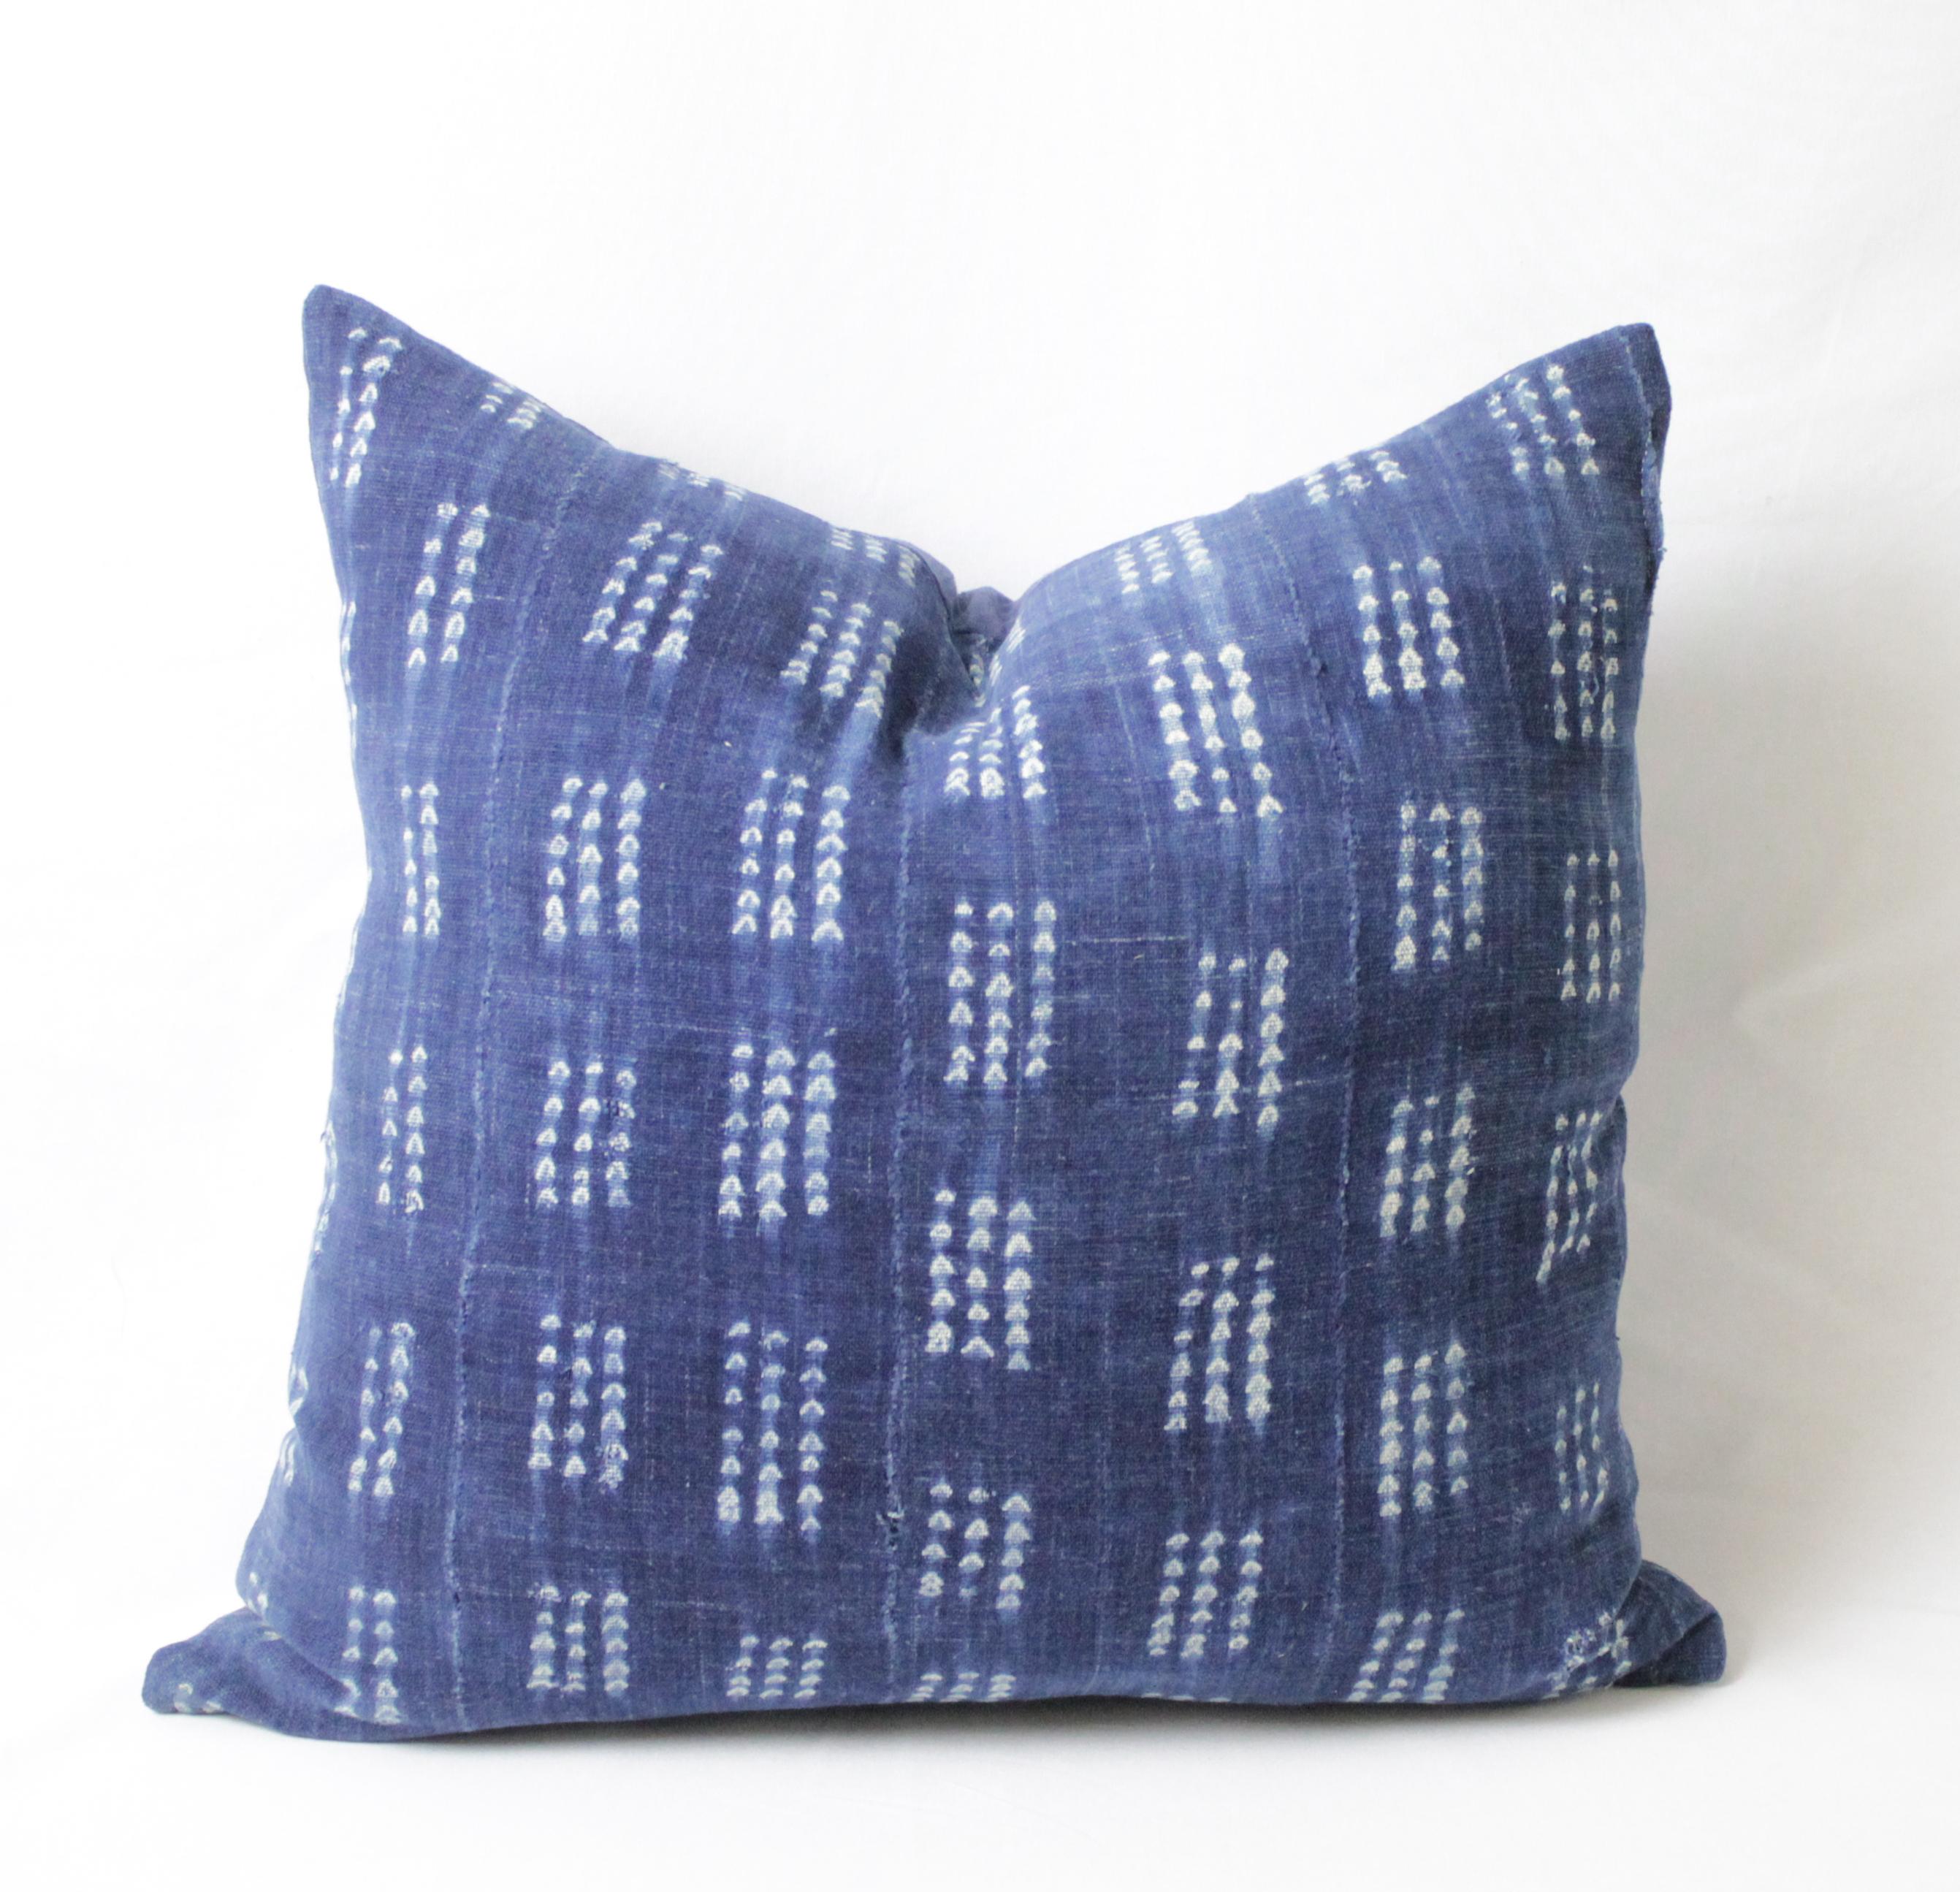 Antique indigo blue batik accent pillows custom made in our studio from vintage African mud cloth fabrics. The fronts of the pillows are in an antique batik fabric, very soft and nubby, the backside are finished in an indigo blue linen, with hidden